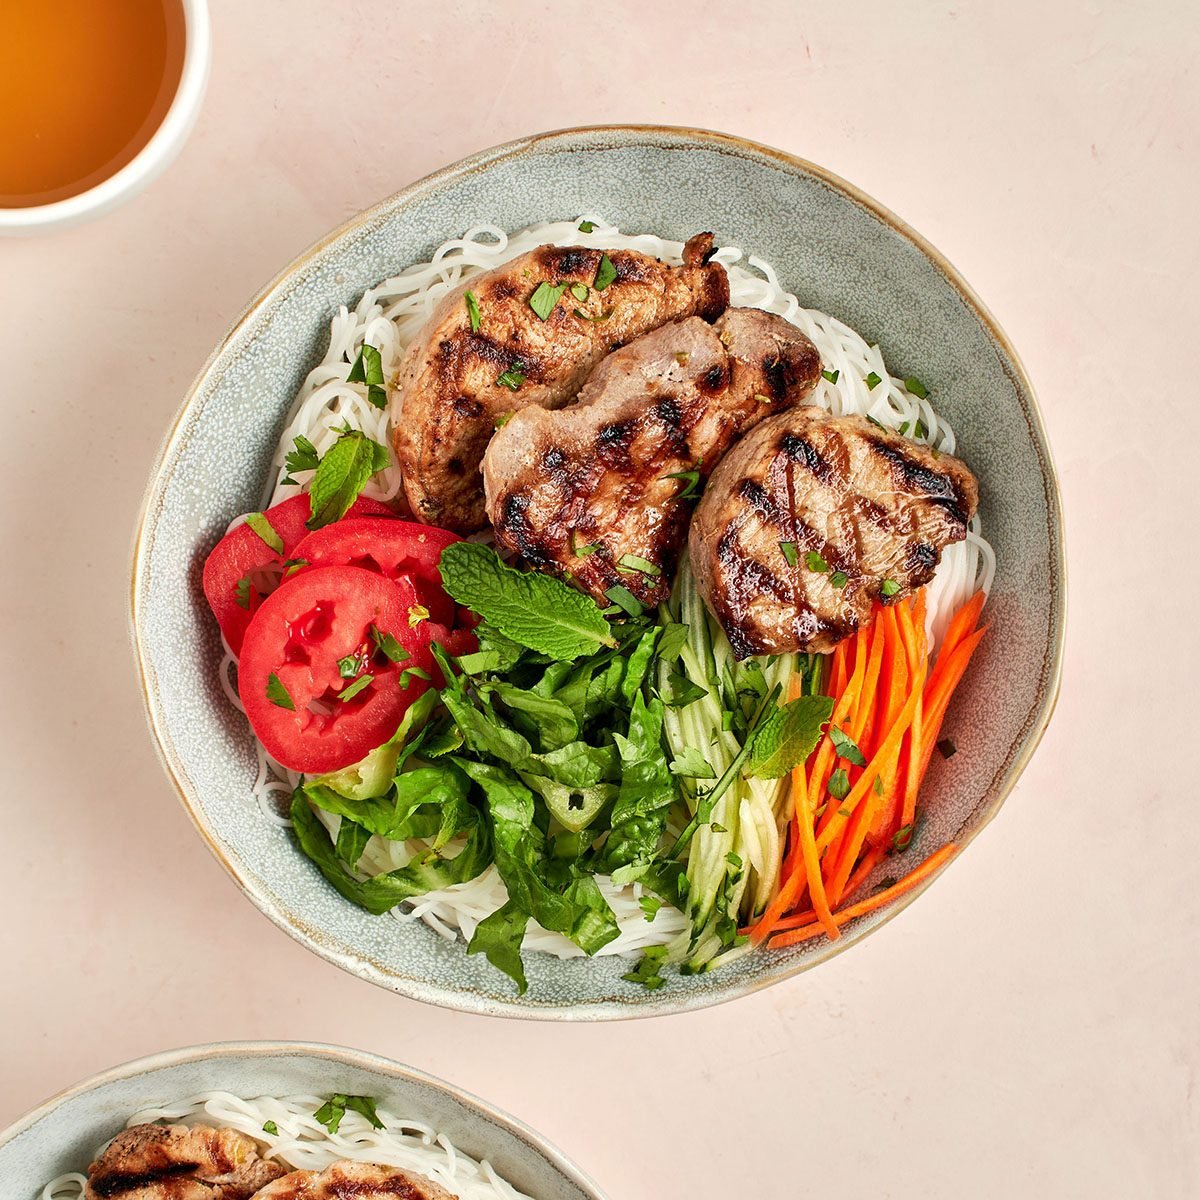 Enjoy this Vietnamese noodle salad with pork by Taste of Home, combining crisp vegetables, fresh herbs and tender pork in a bright lime dressing for a light, refreshing meal.